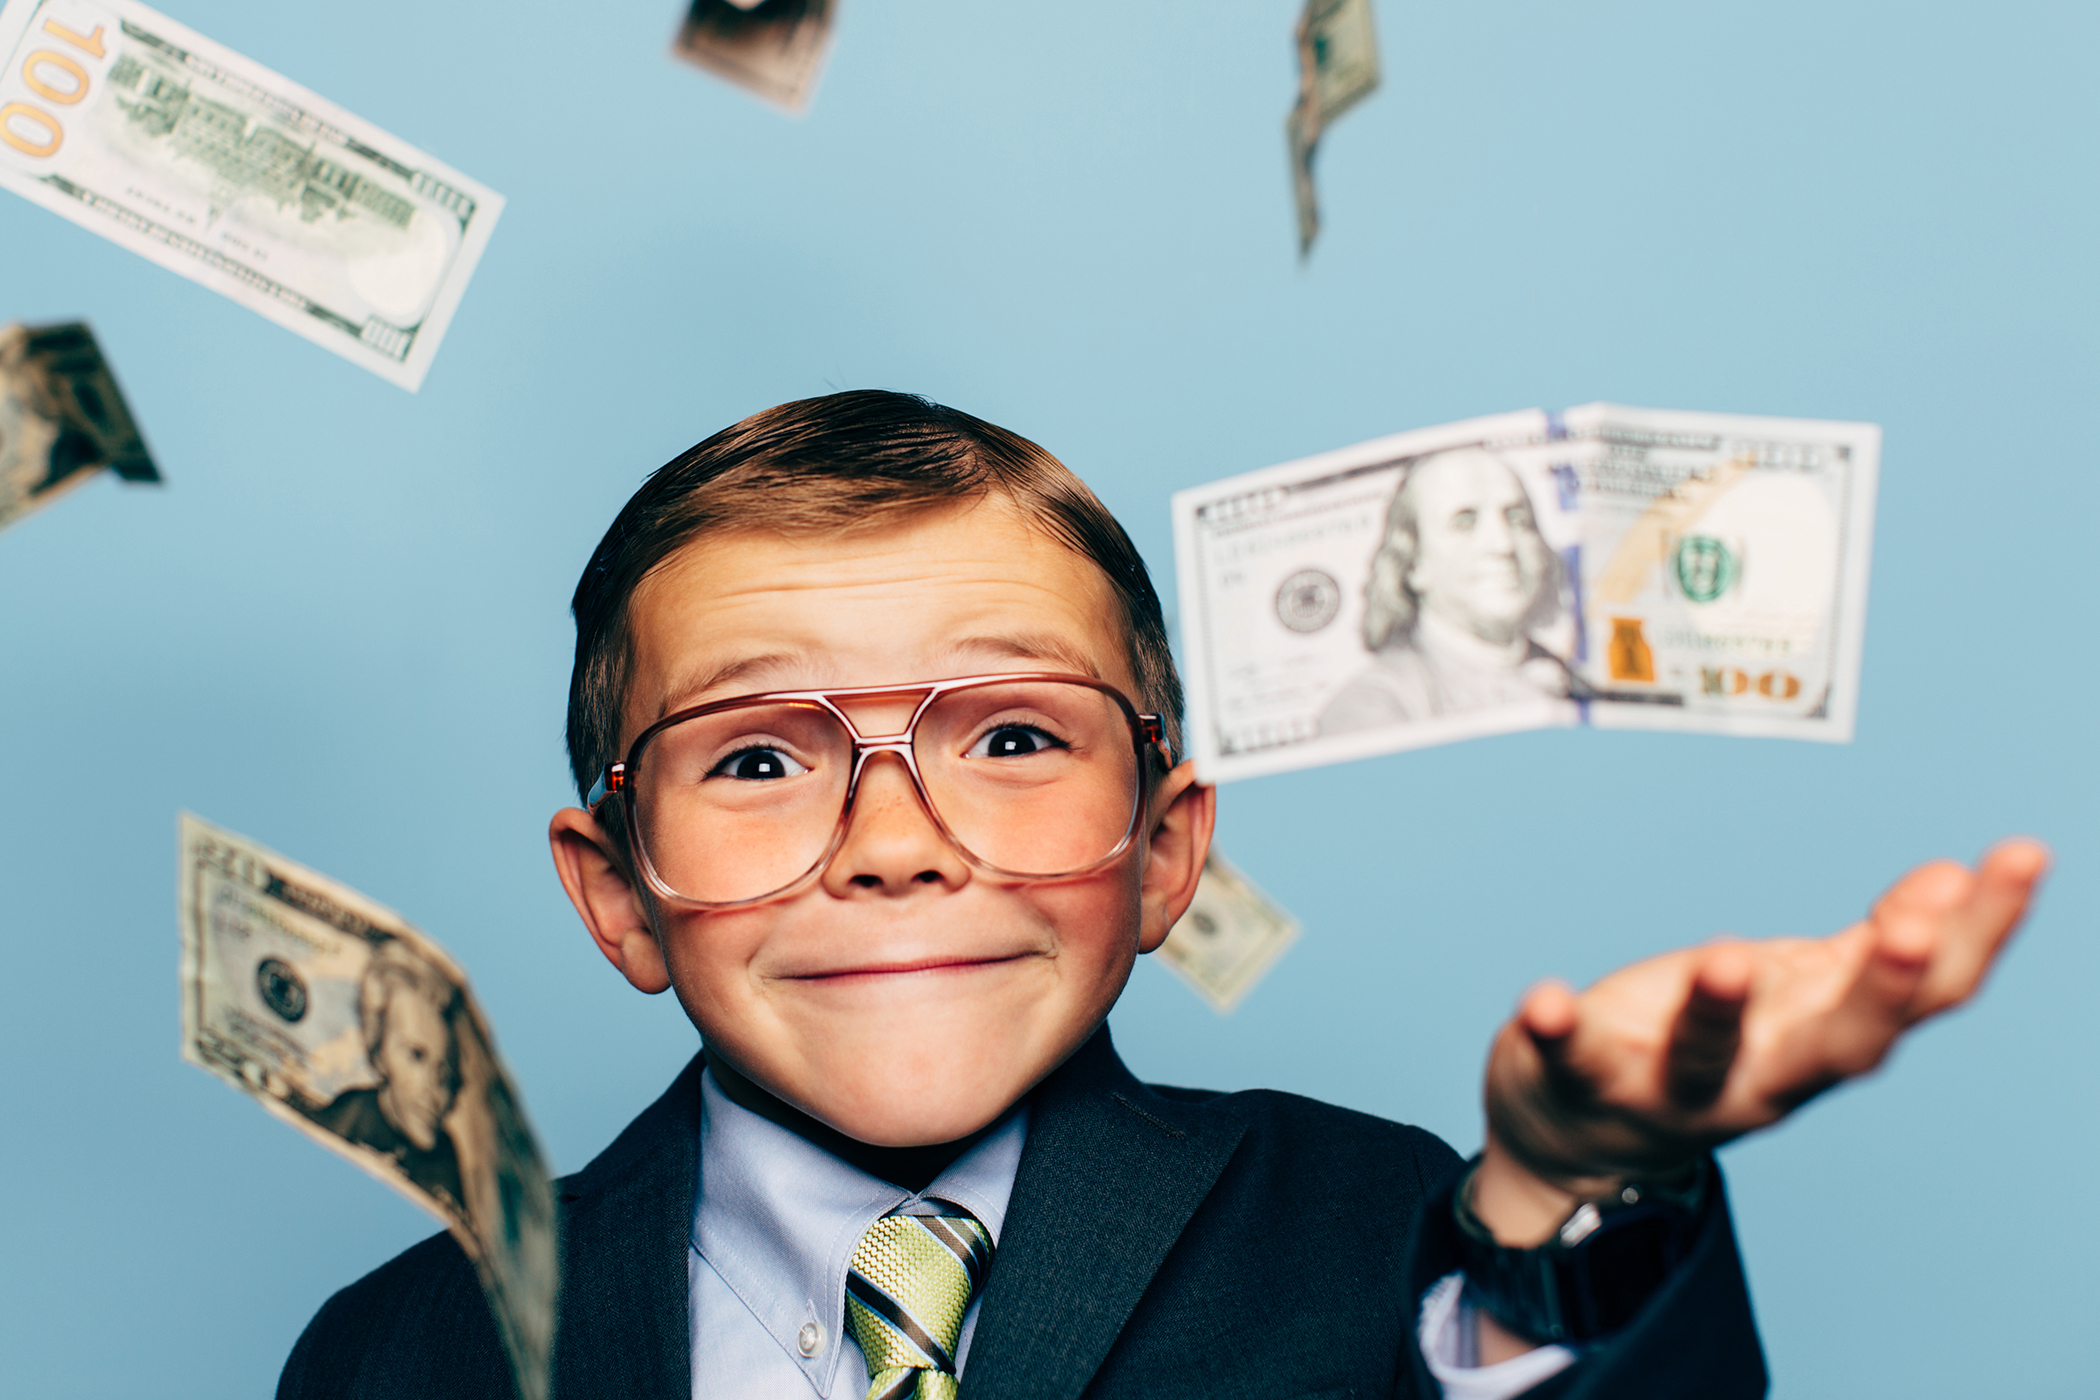 5 things to teach kids about money